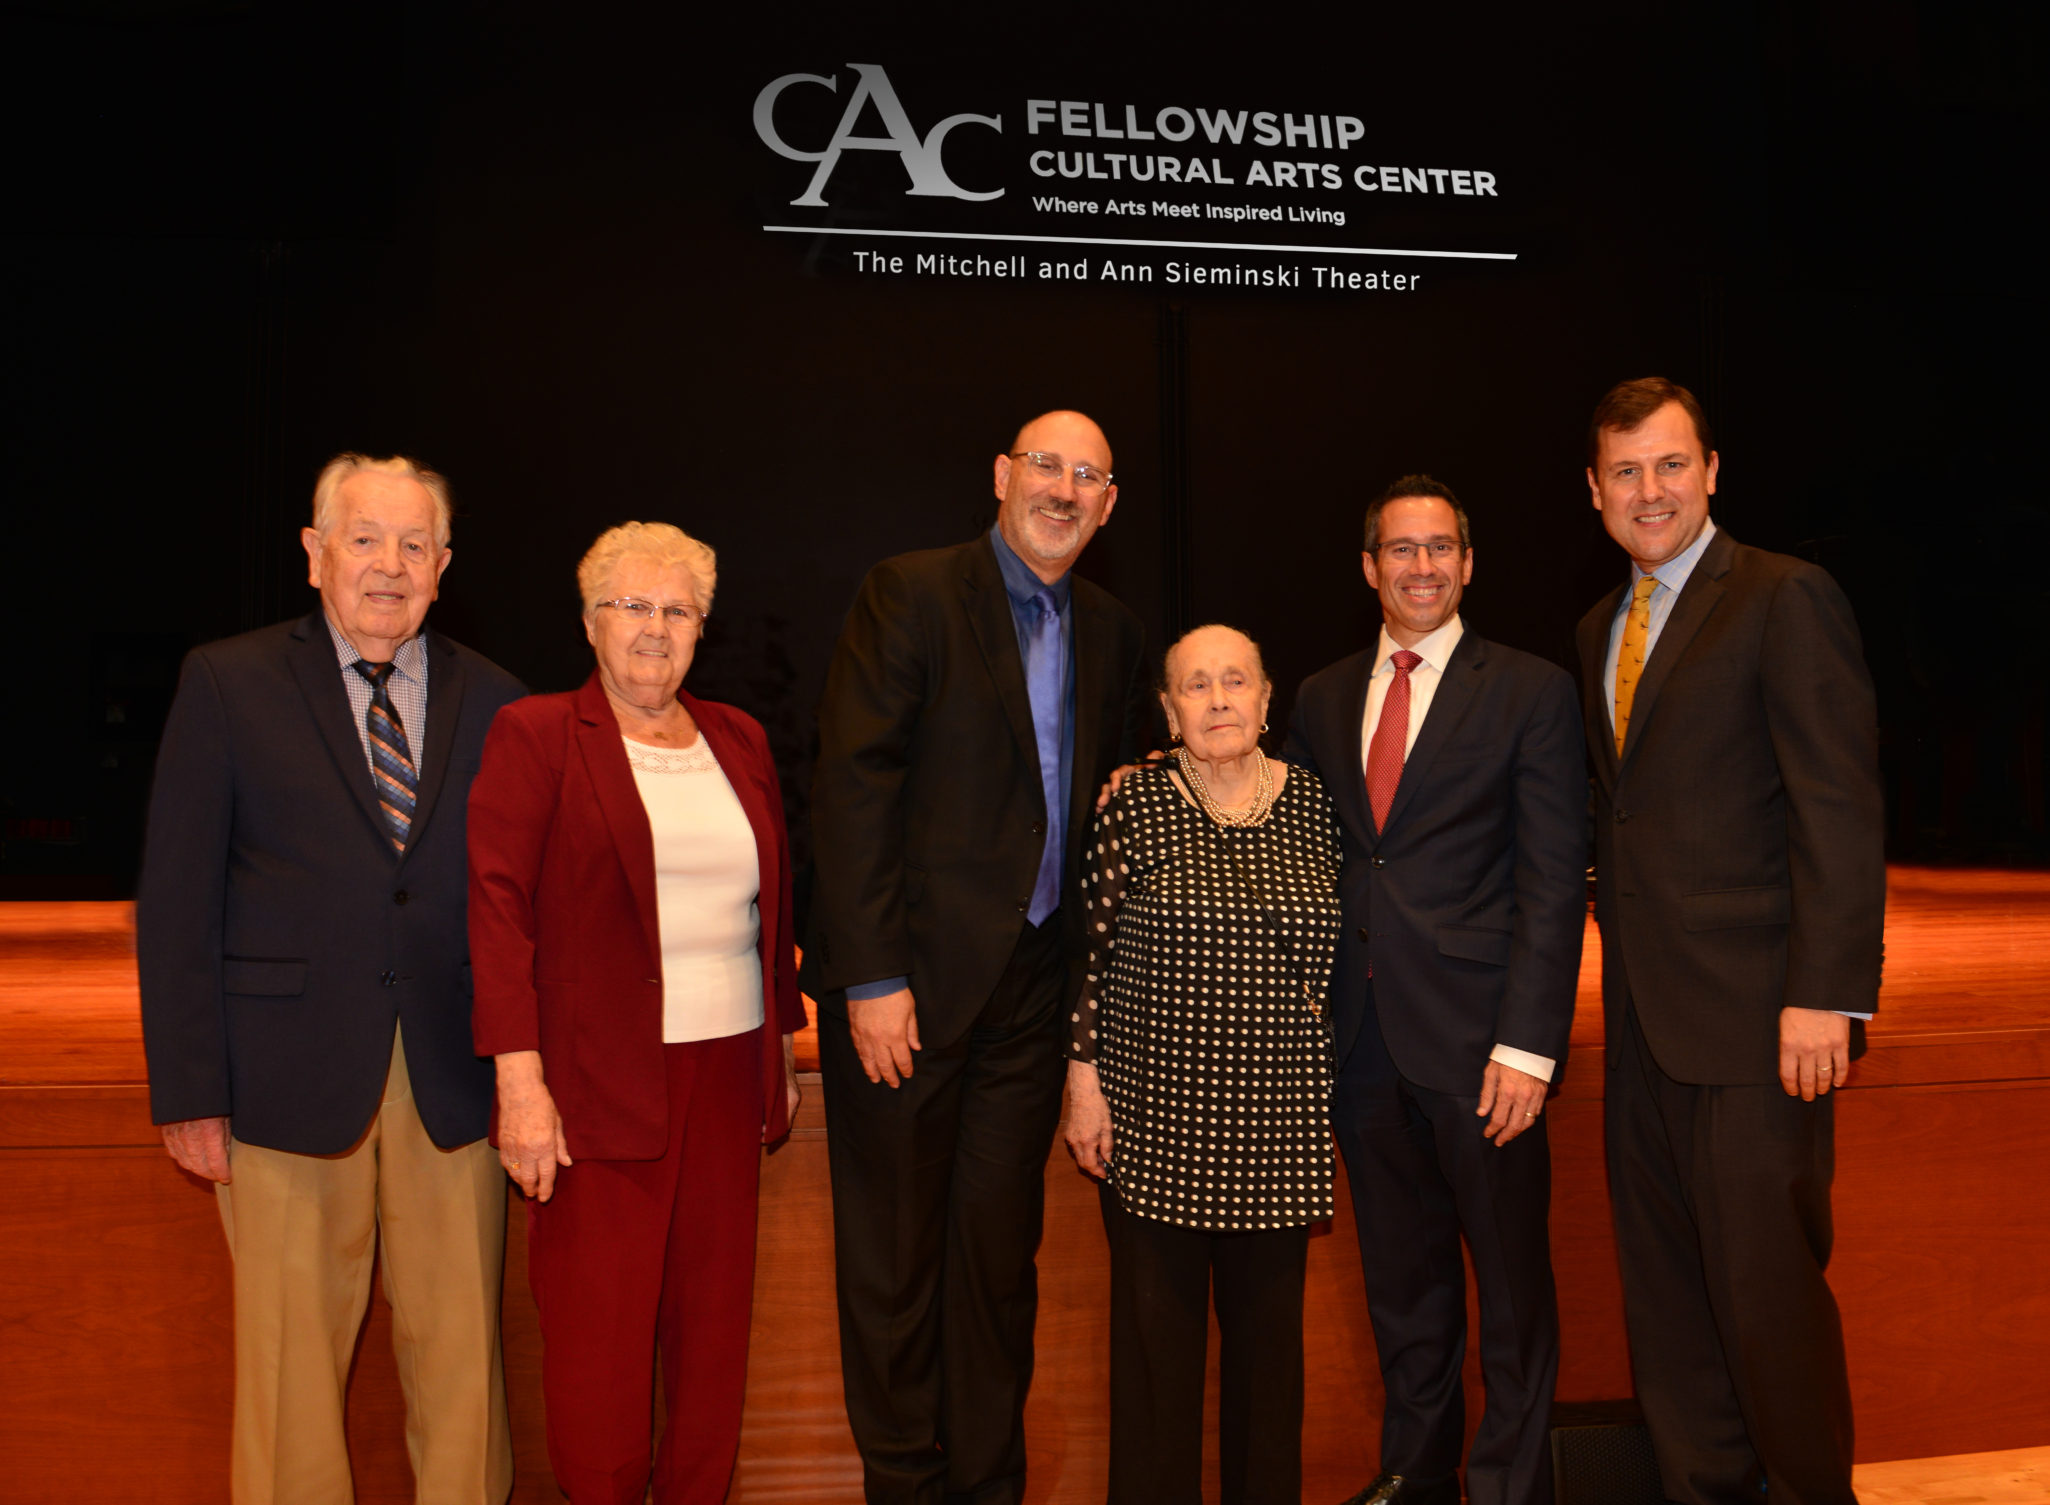 grand opening of the fellowship cultural arts center theater